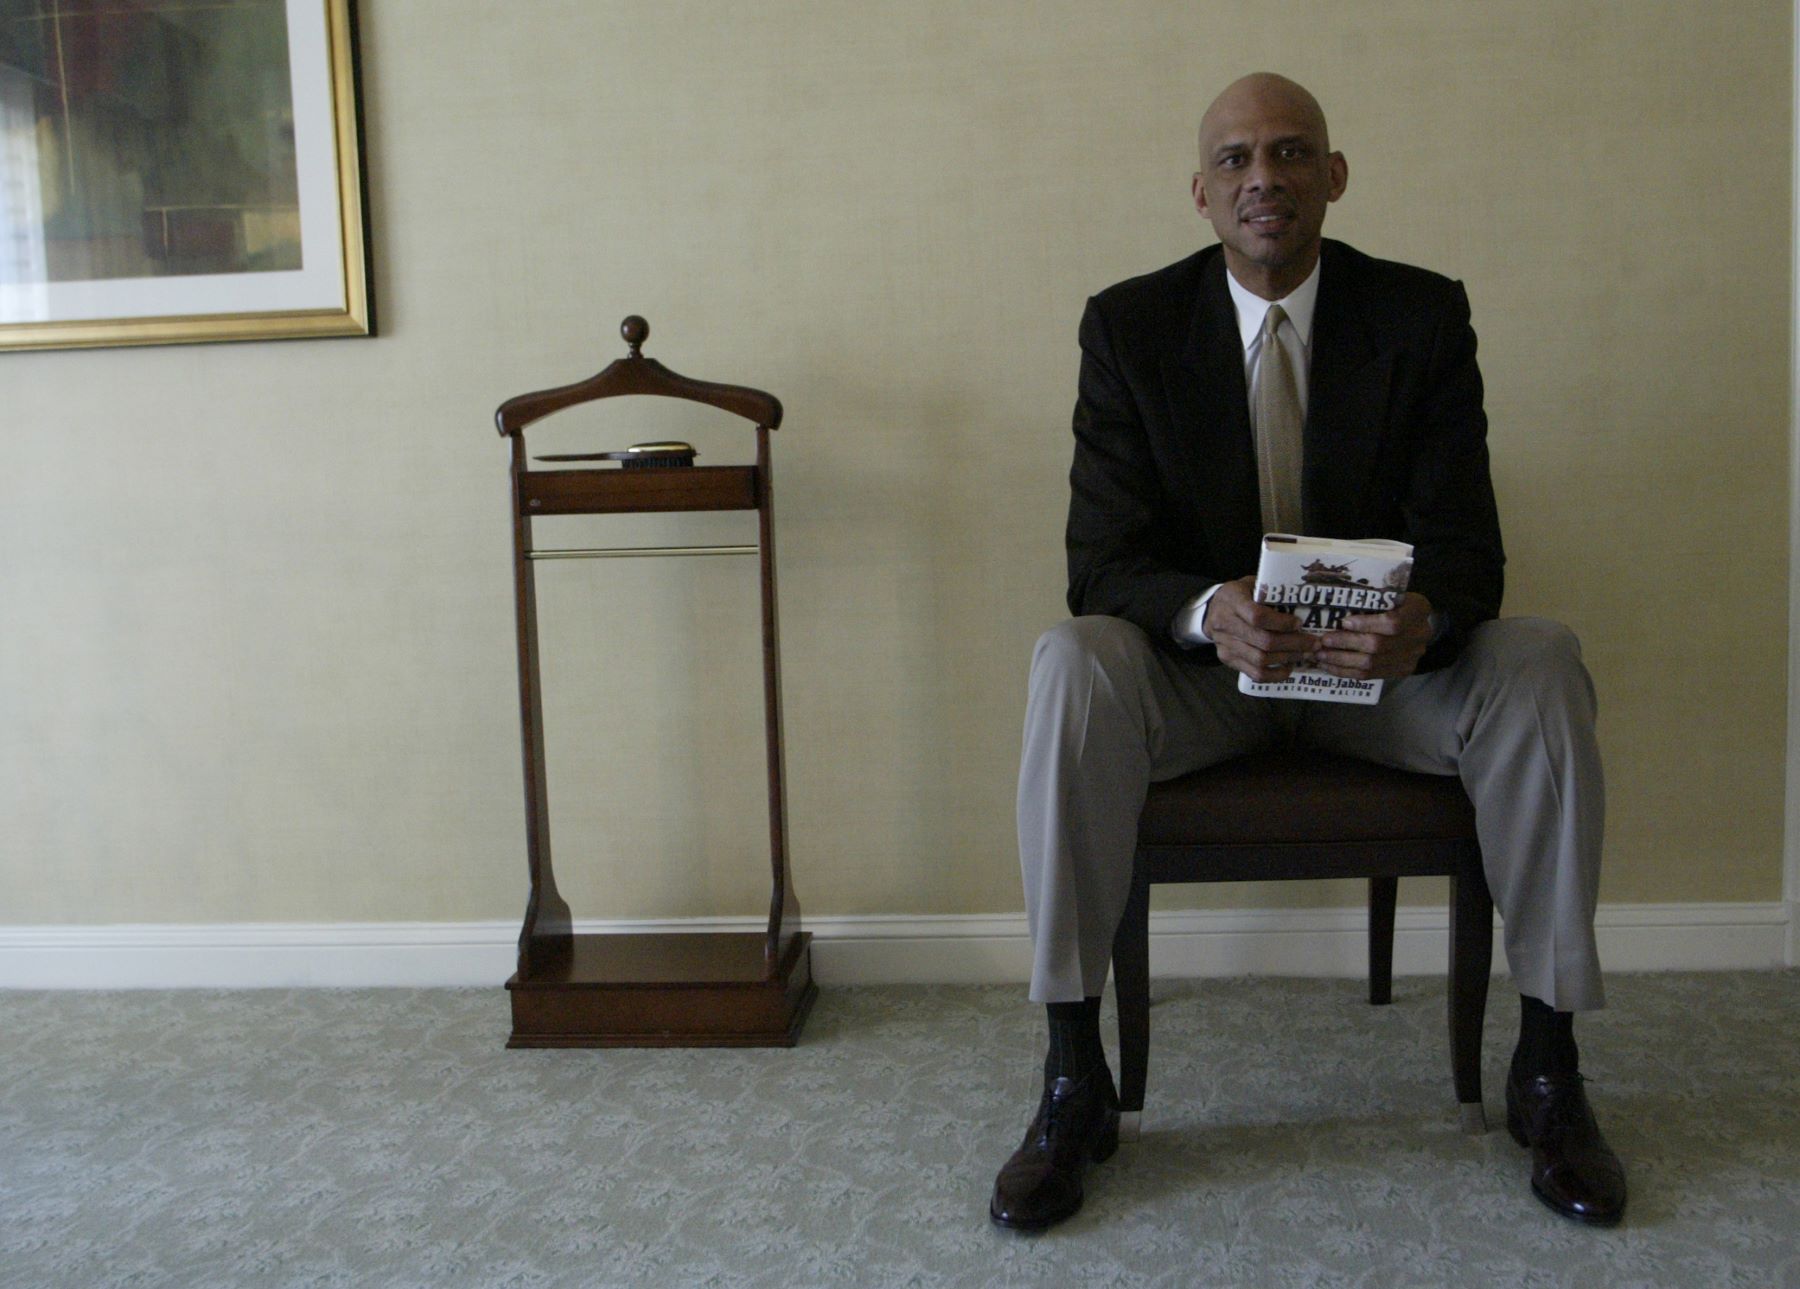 Kareem Abdul-Jabbar in Washington D.C. holding his book 'Brother in Arms' about his father's experiences in World War II